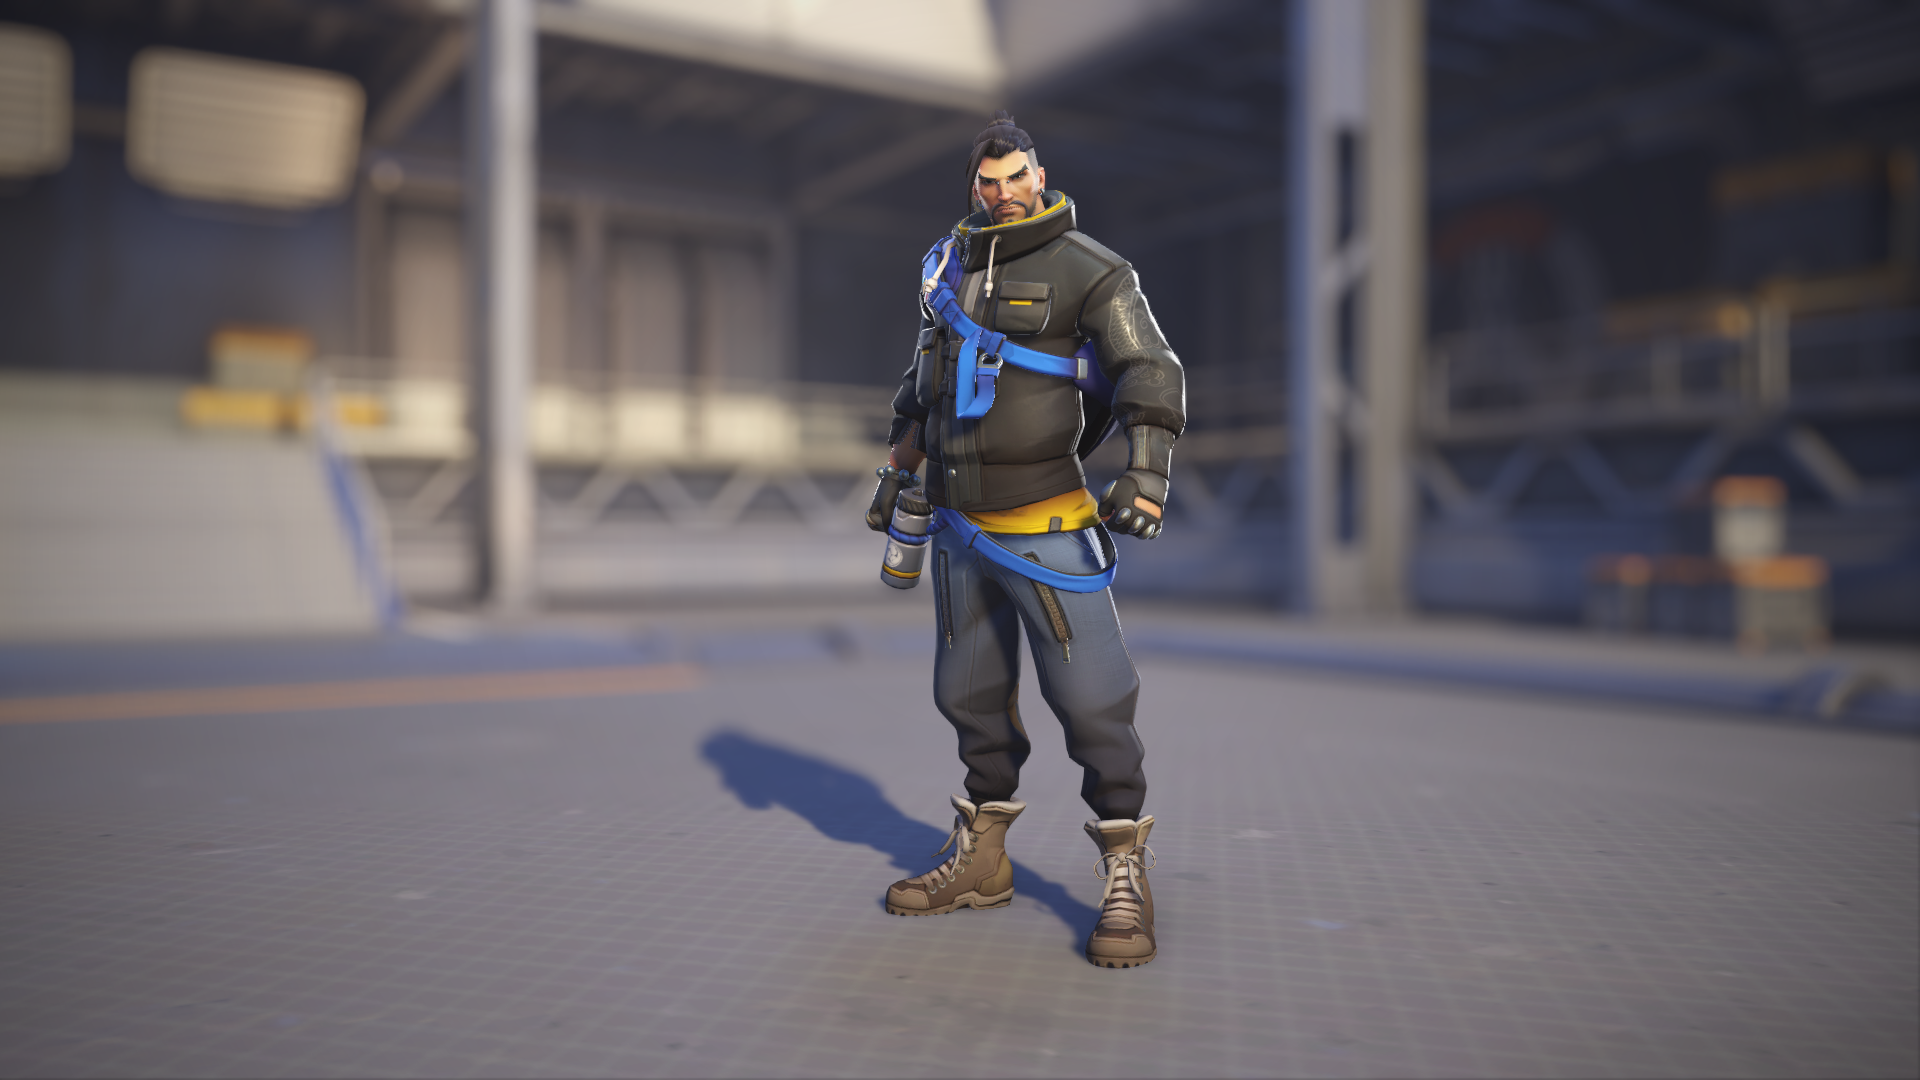 Hanzo models his Casual skin in Overwatch 2.